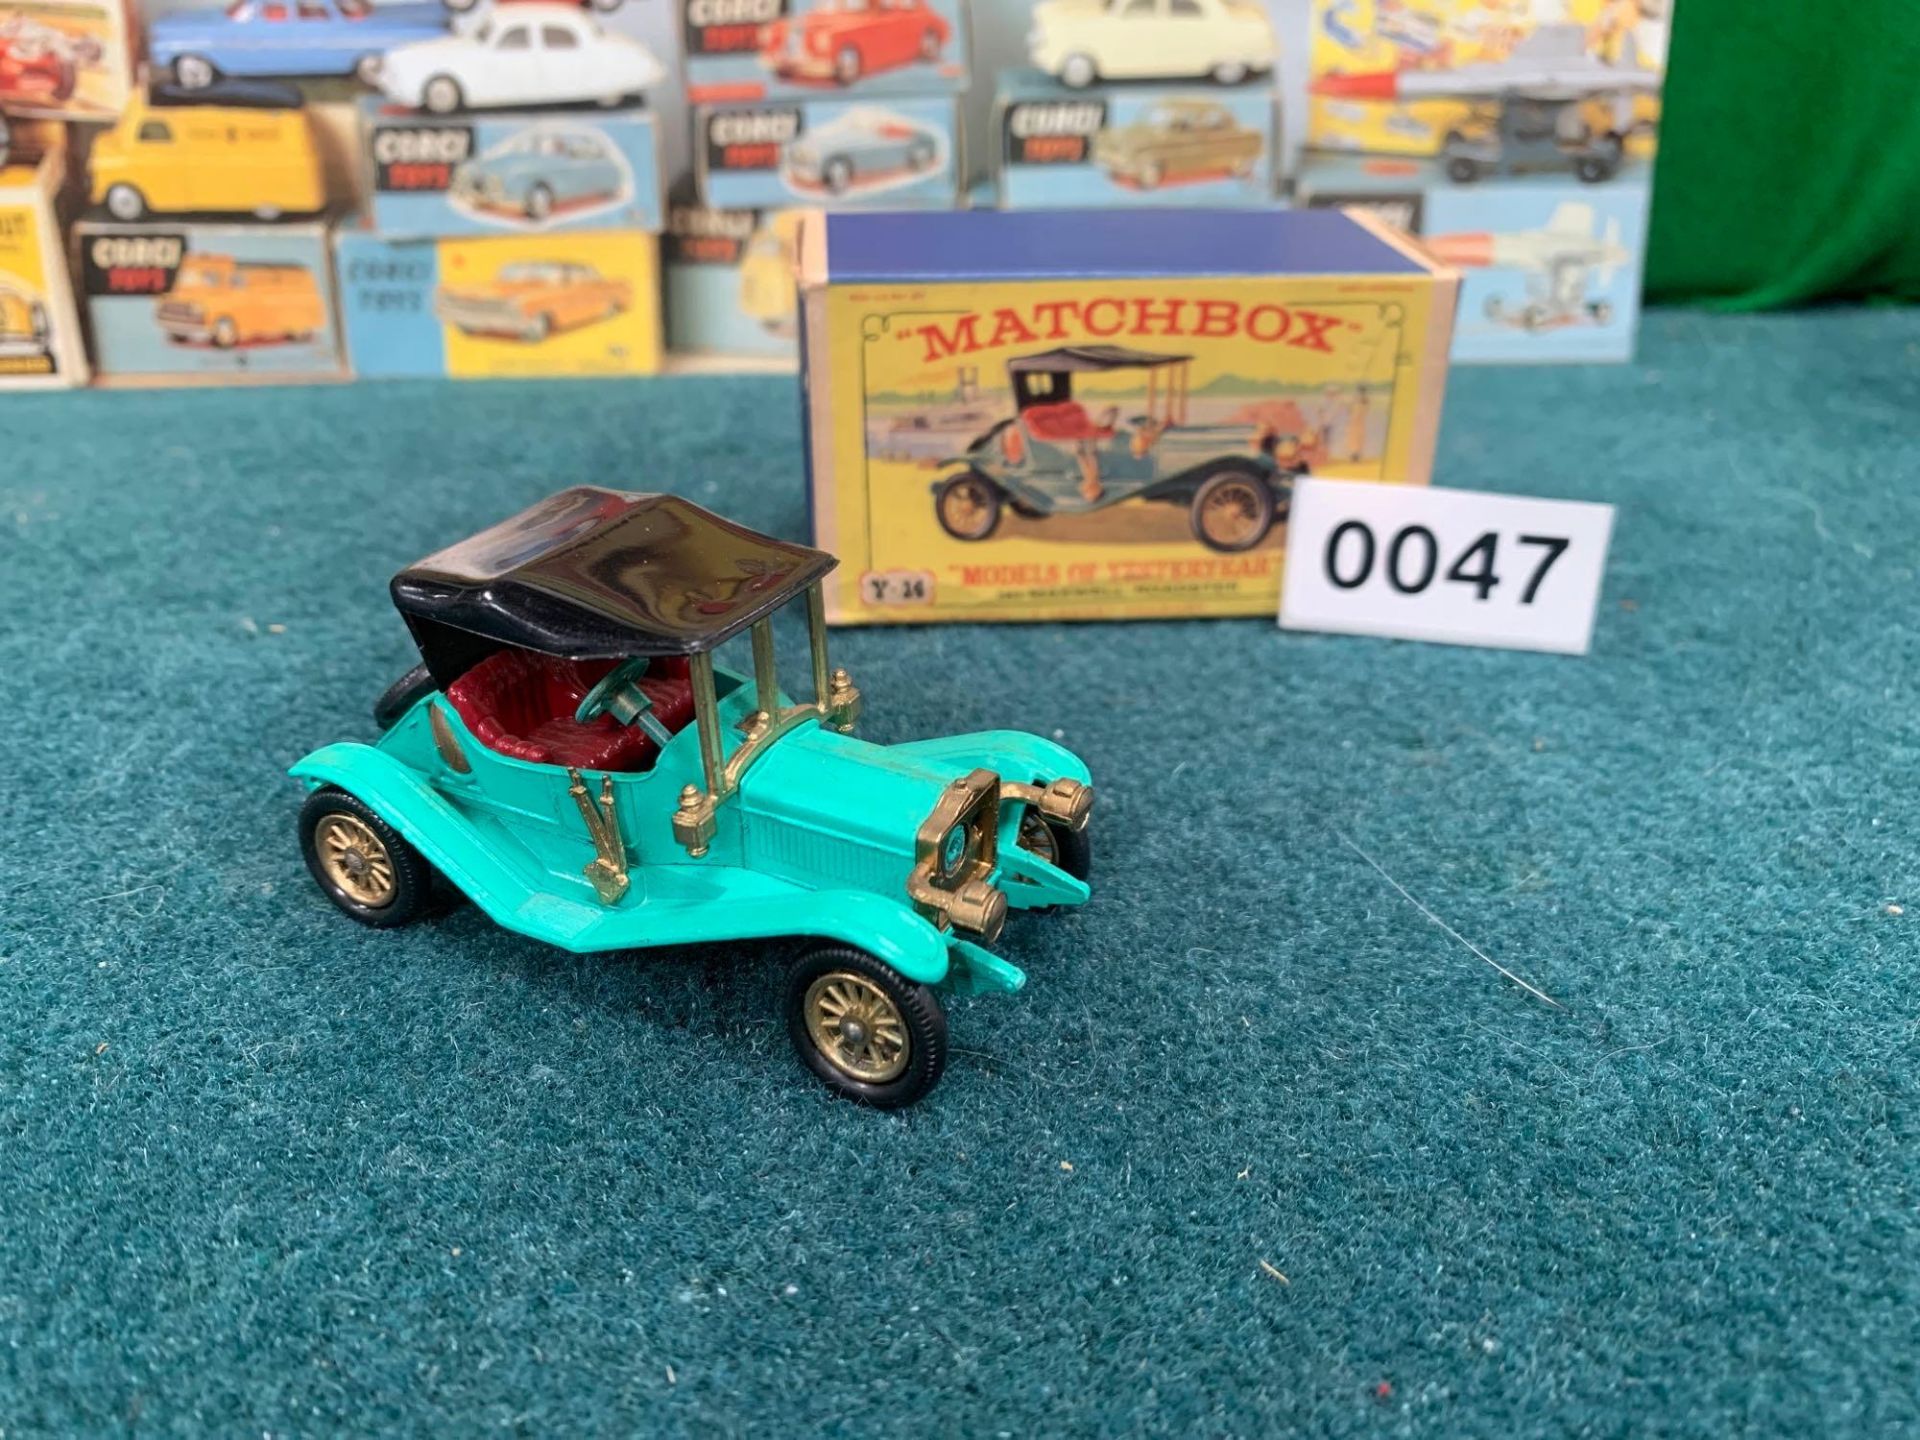 Matchbox Diecast Models Of Yesteryear #Y-14 1911 Maxwell Roadster In Box